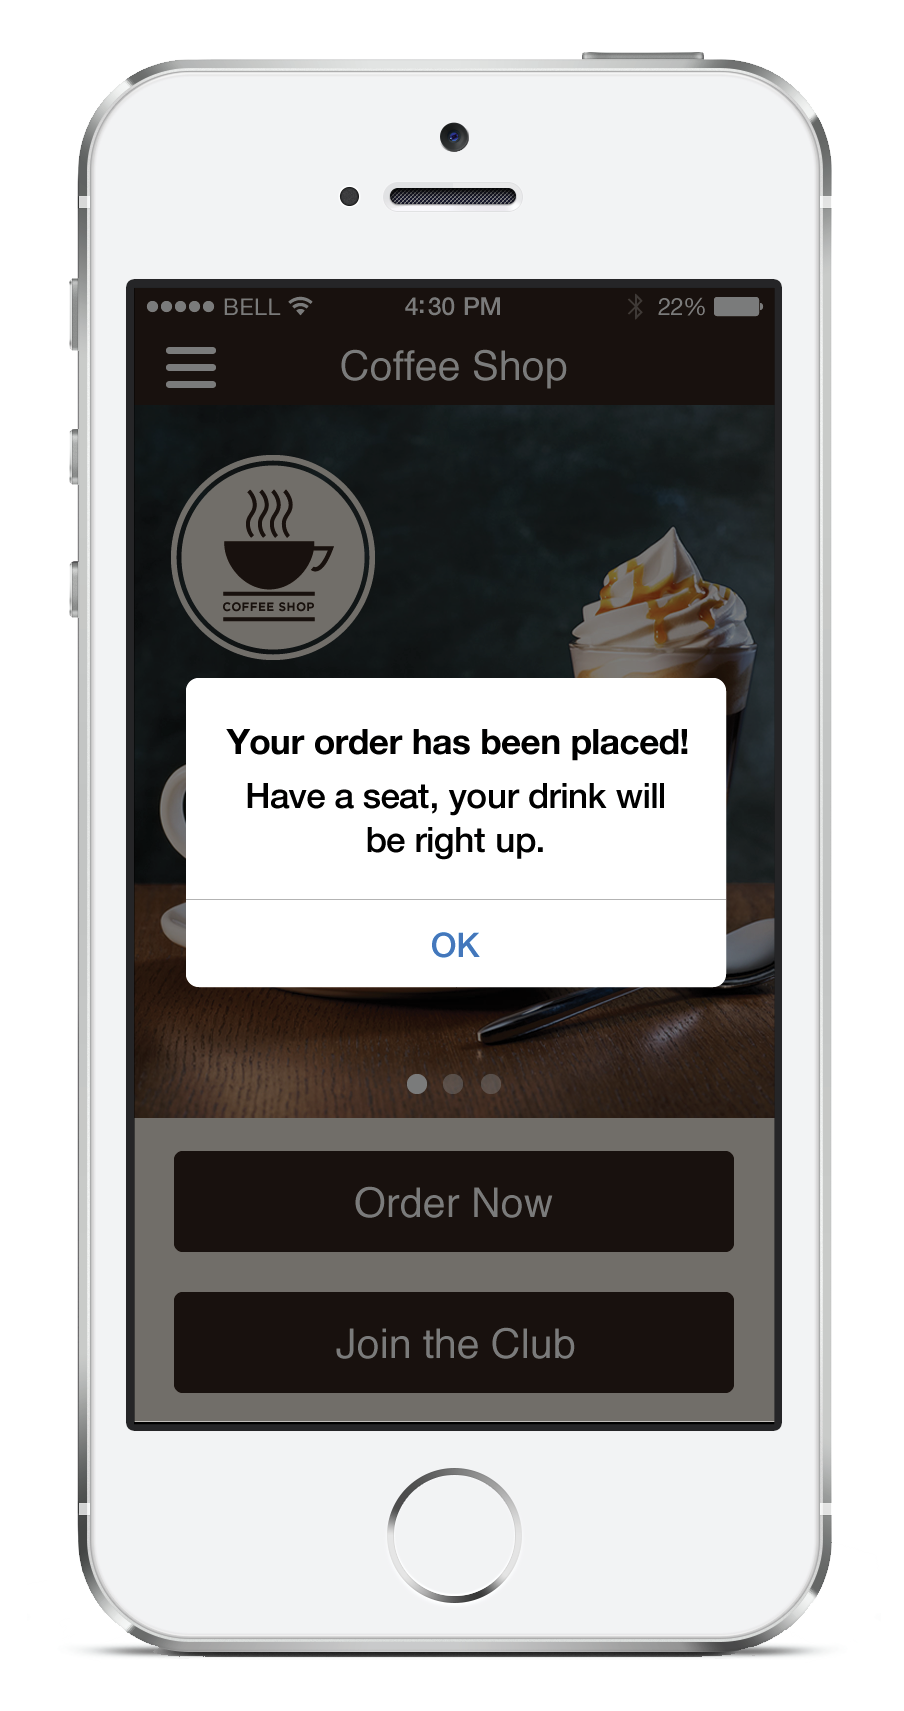 Order placed push notification